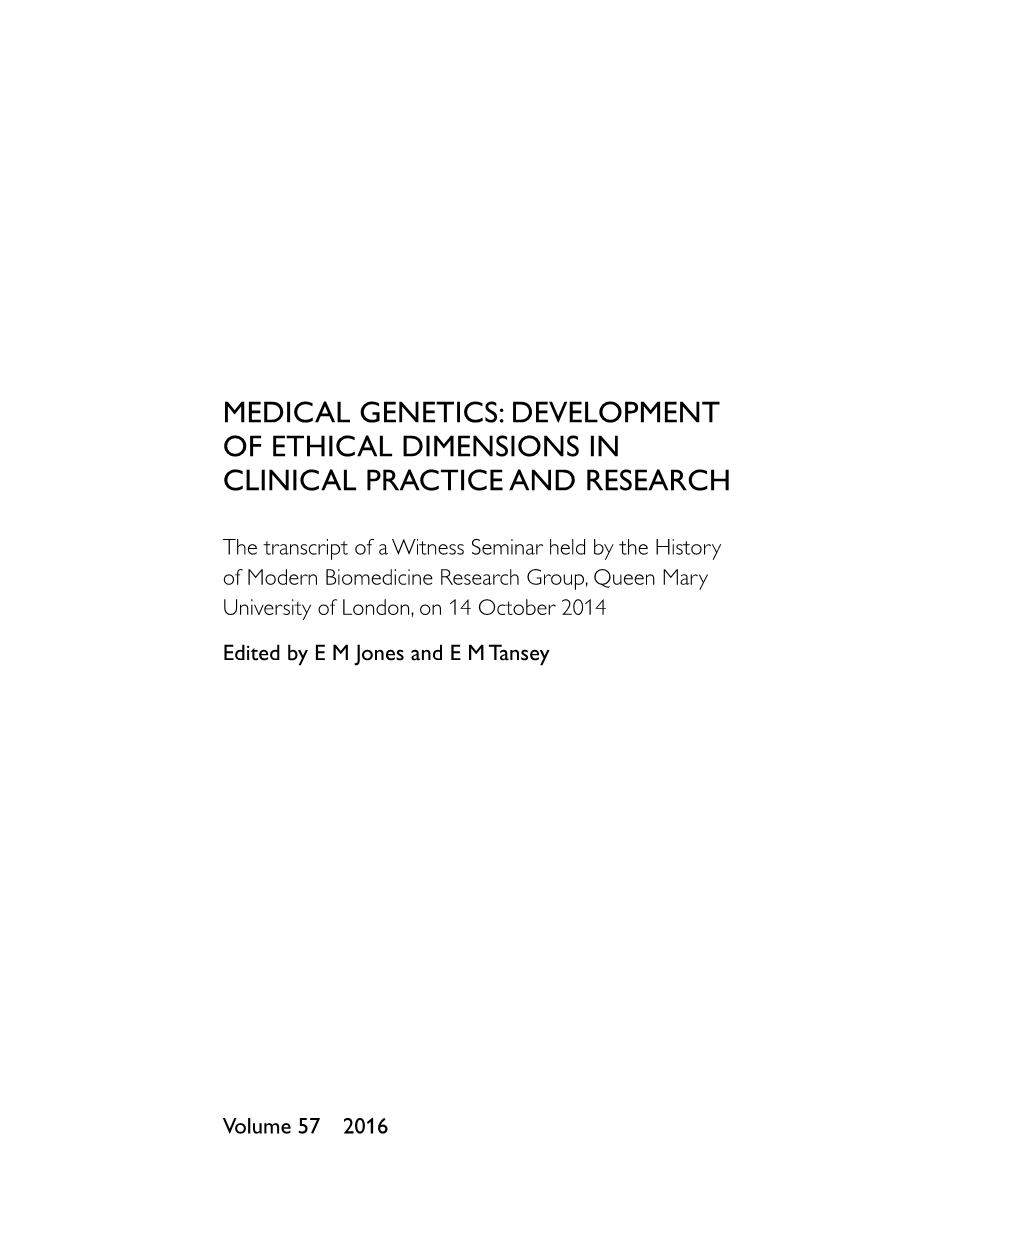 Medical Genetics: Development of Ethical Dimensions in Clinical Practice and Research